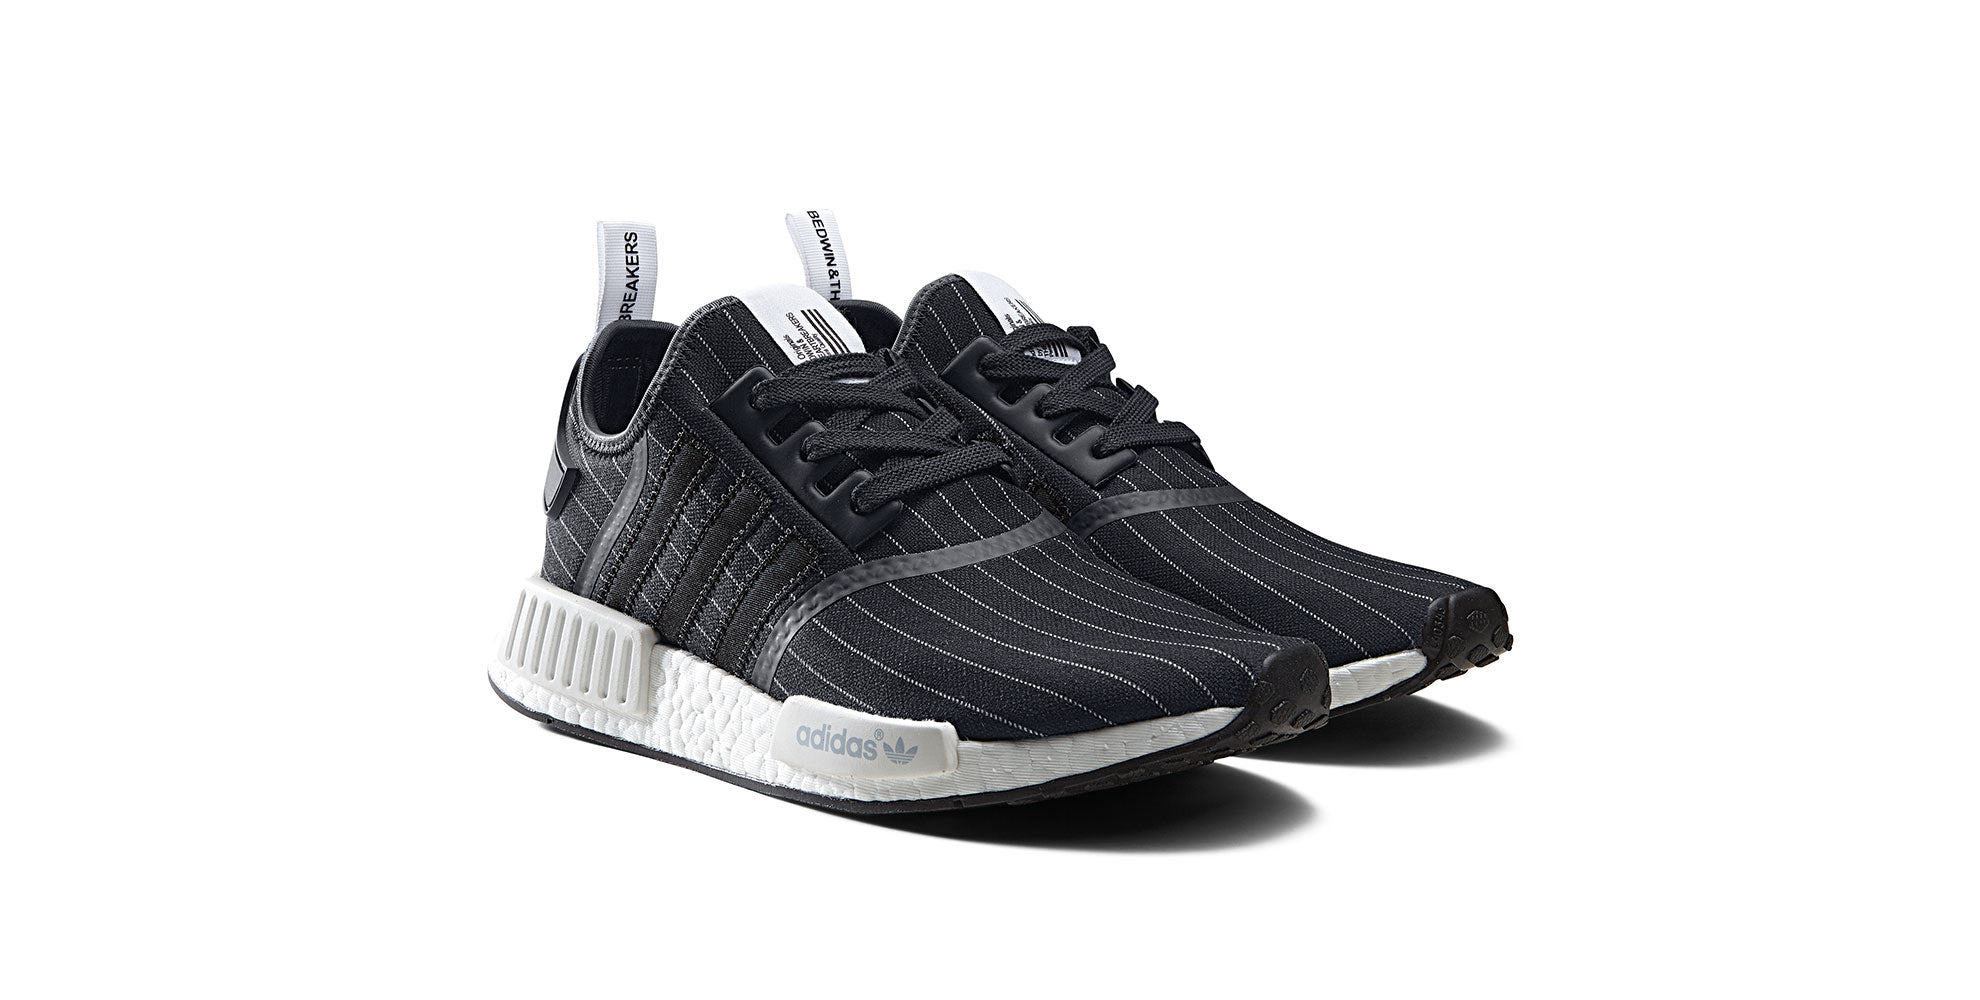 BEDWIN & THE HEARTBREAKERS X ADIDAS NMD R1